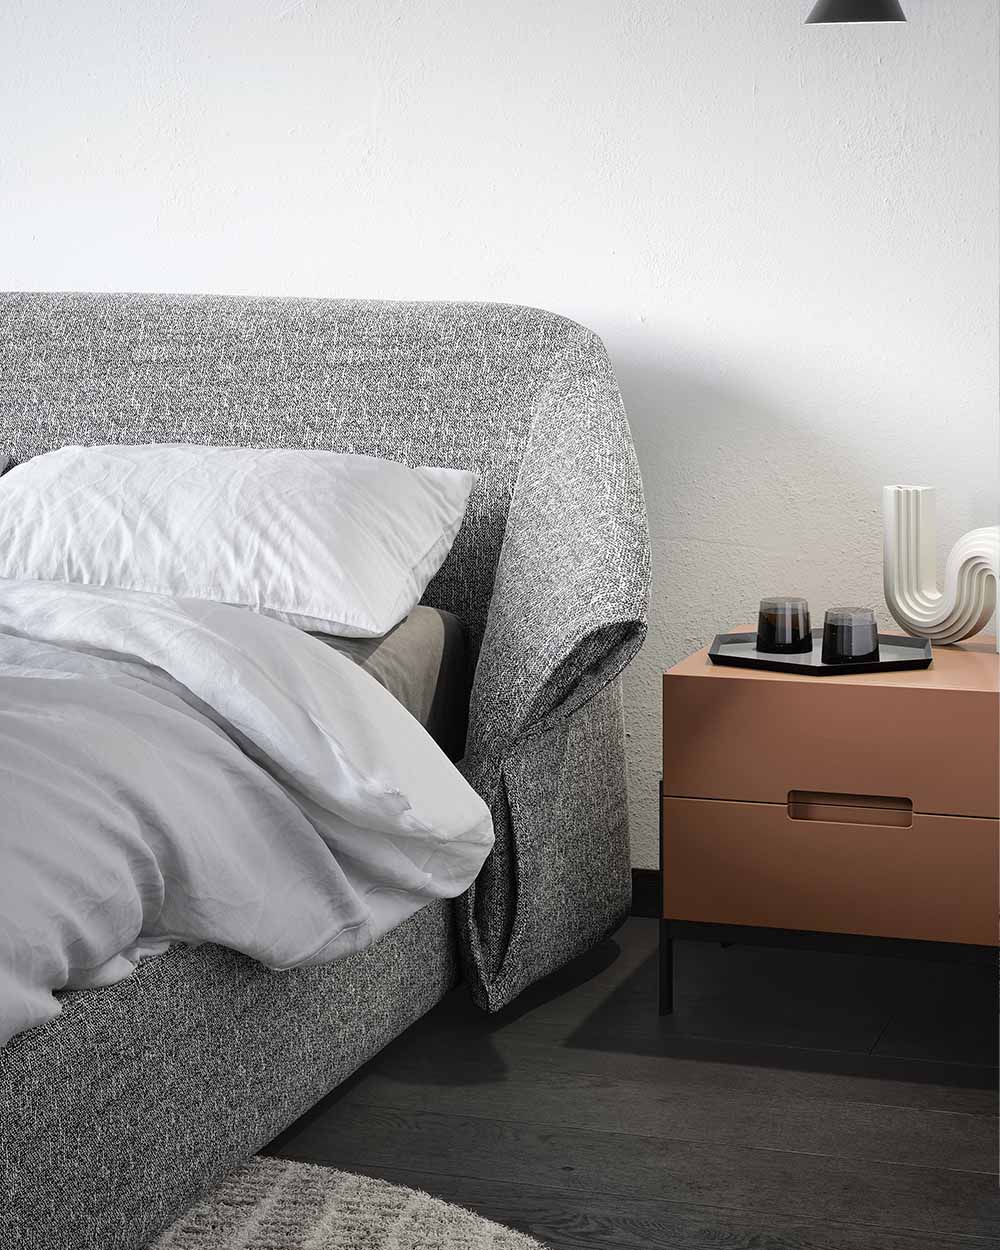 Float luxury Italian bedside table and drawer unit by Novamobili. Sold by Krieder UK.